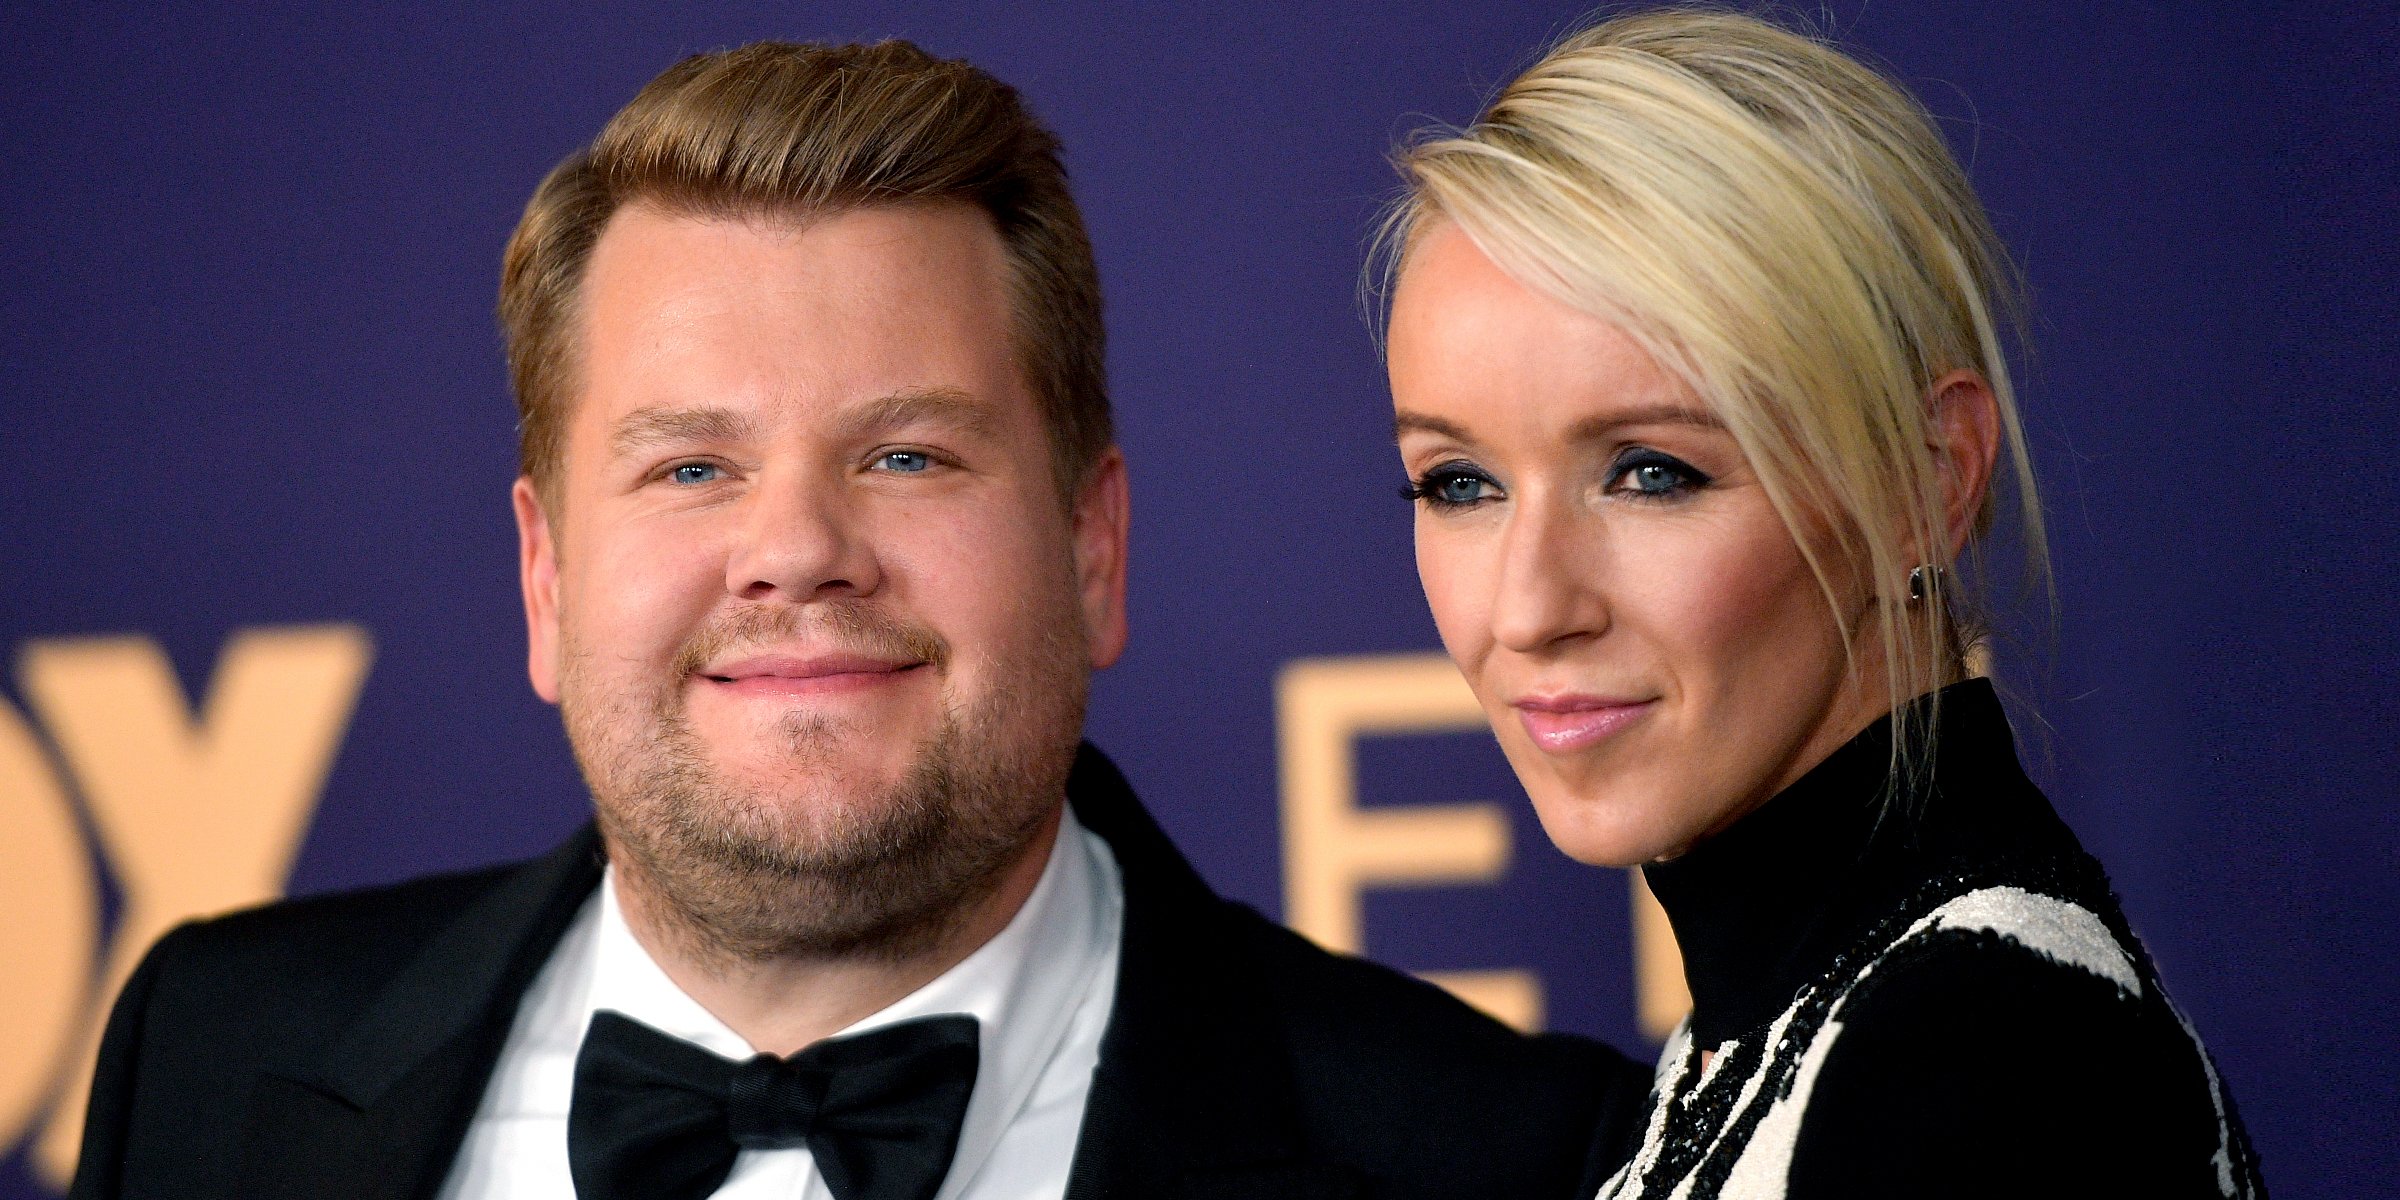 James Corden and Julia Carey | Source: Getty Images 